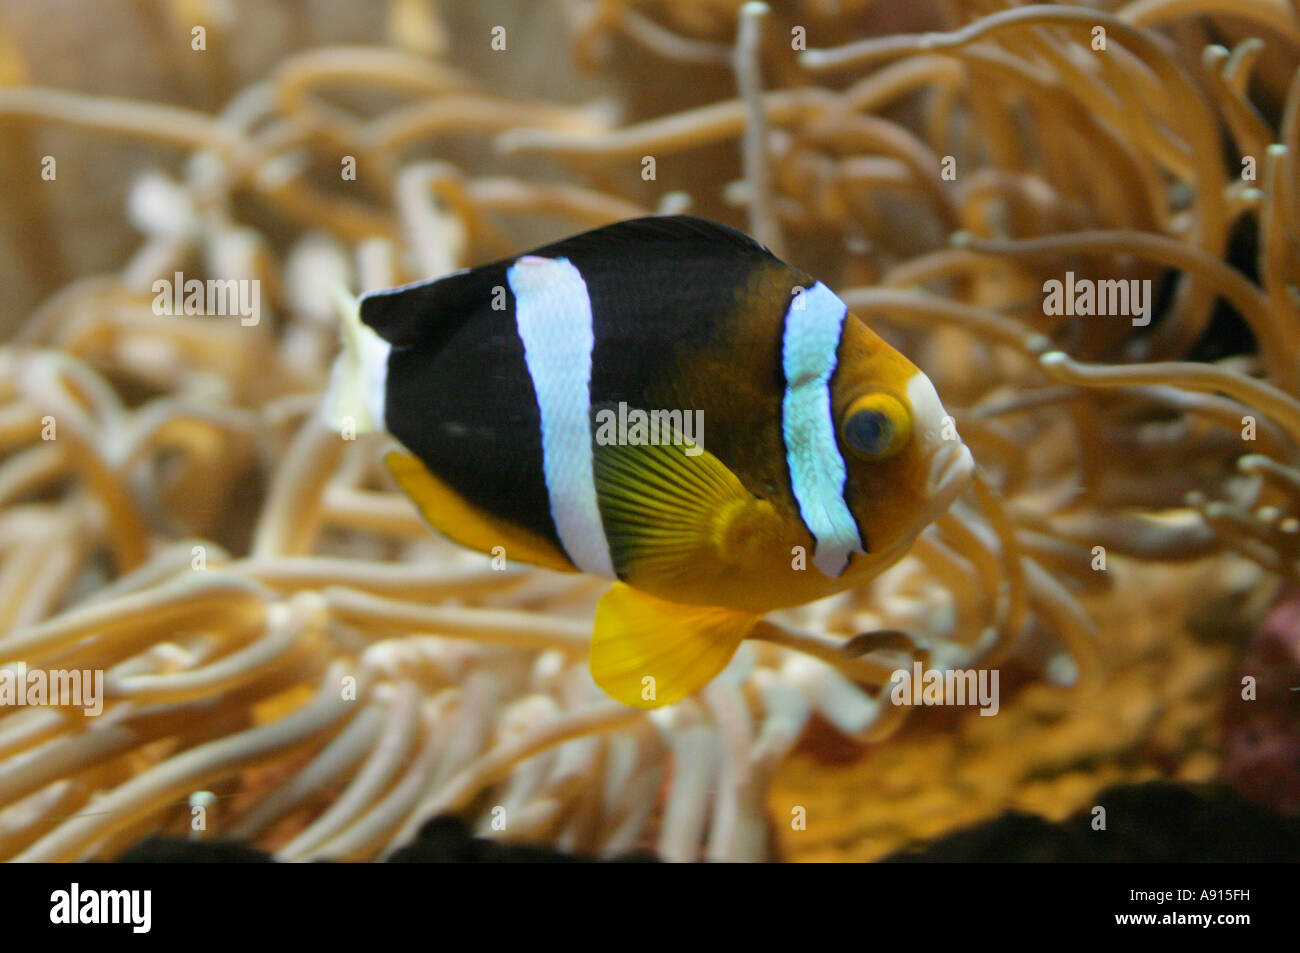 Clarks Anemone Fish, Amphiprion clarkii, aka the Clown Fish, Pomacentridae. Indian Ocean. Stock Photo